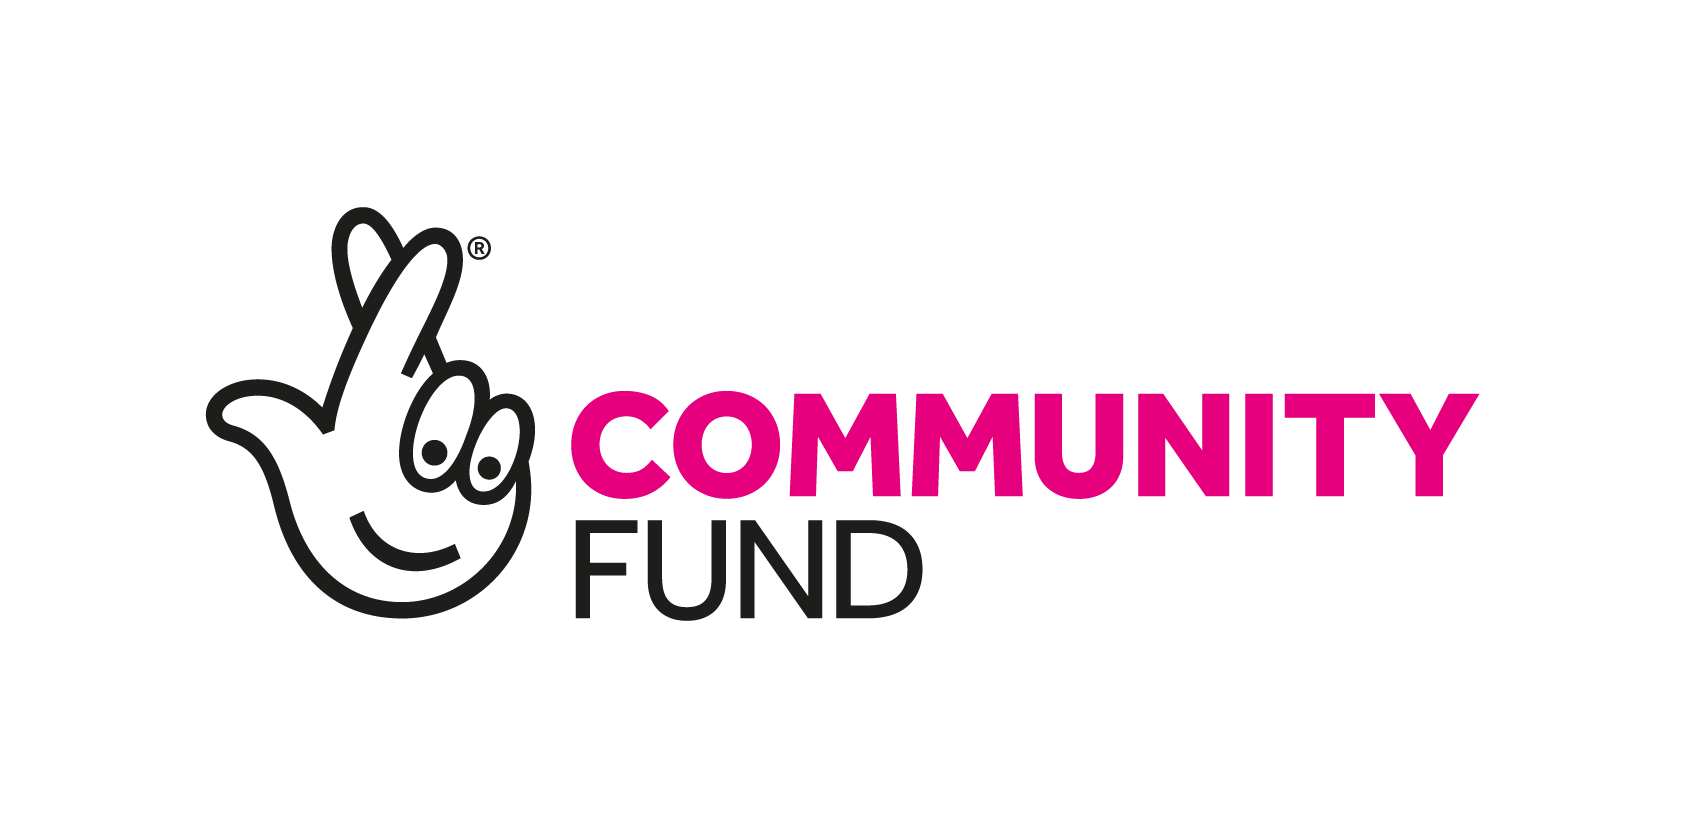 Community lottery fund logo.png